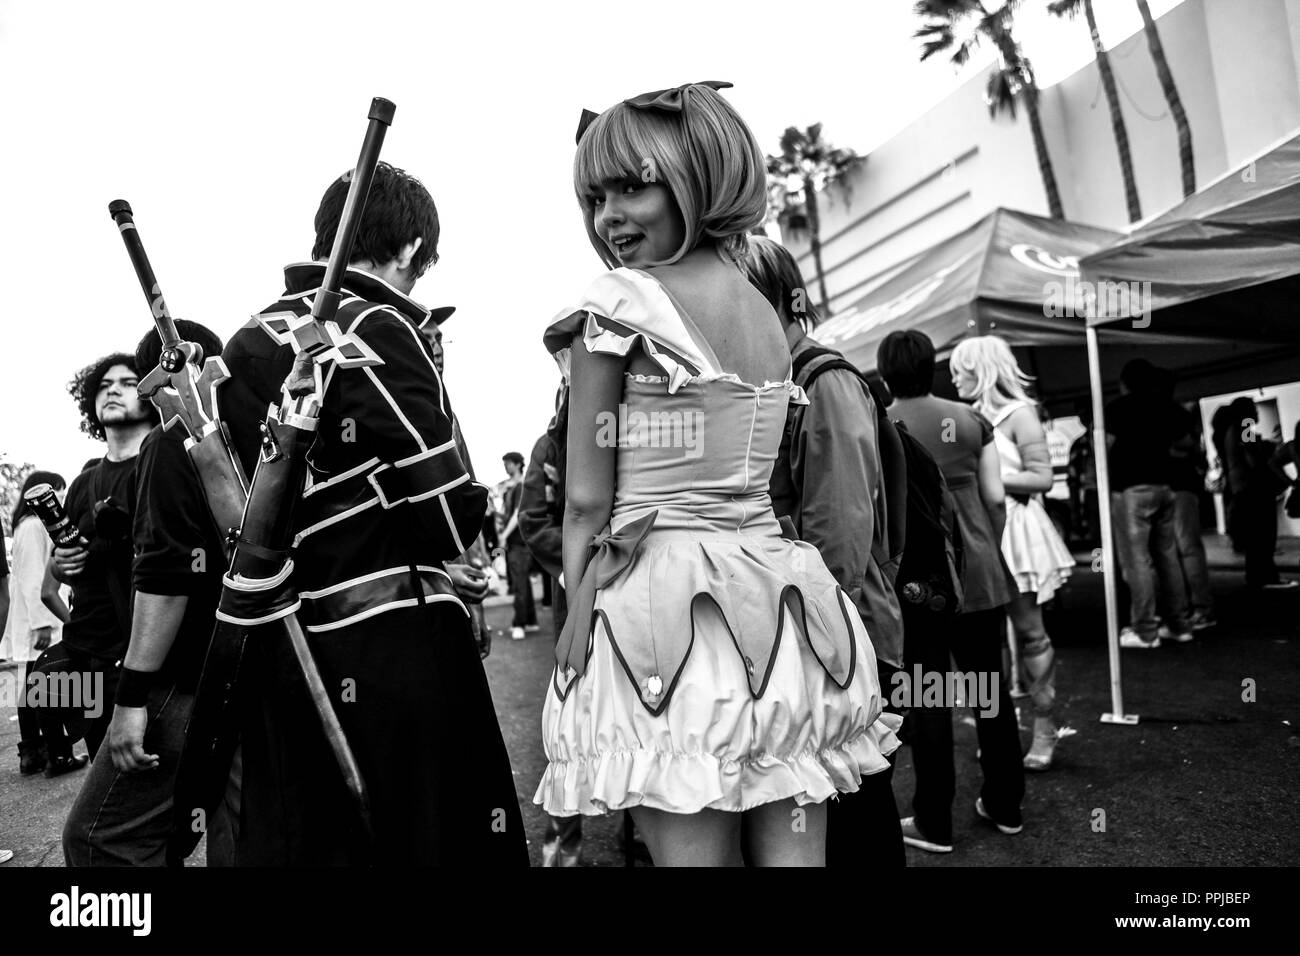 This evening was held on Chibi Anime Fest 2014 which is part of a subculture adopted also in Mexico, is known as Otaku is a term from Japan as a synon Stock Photo